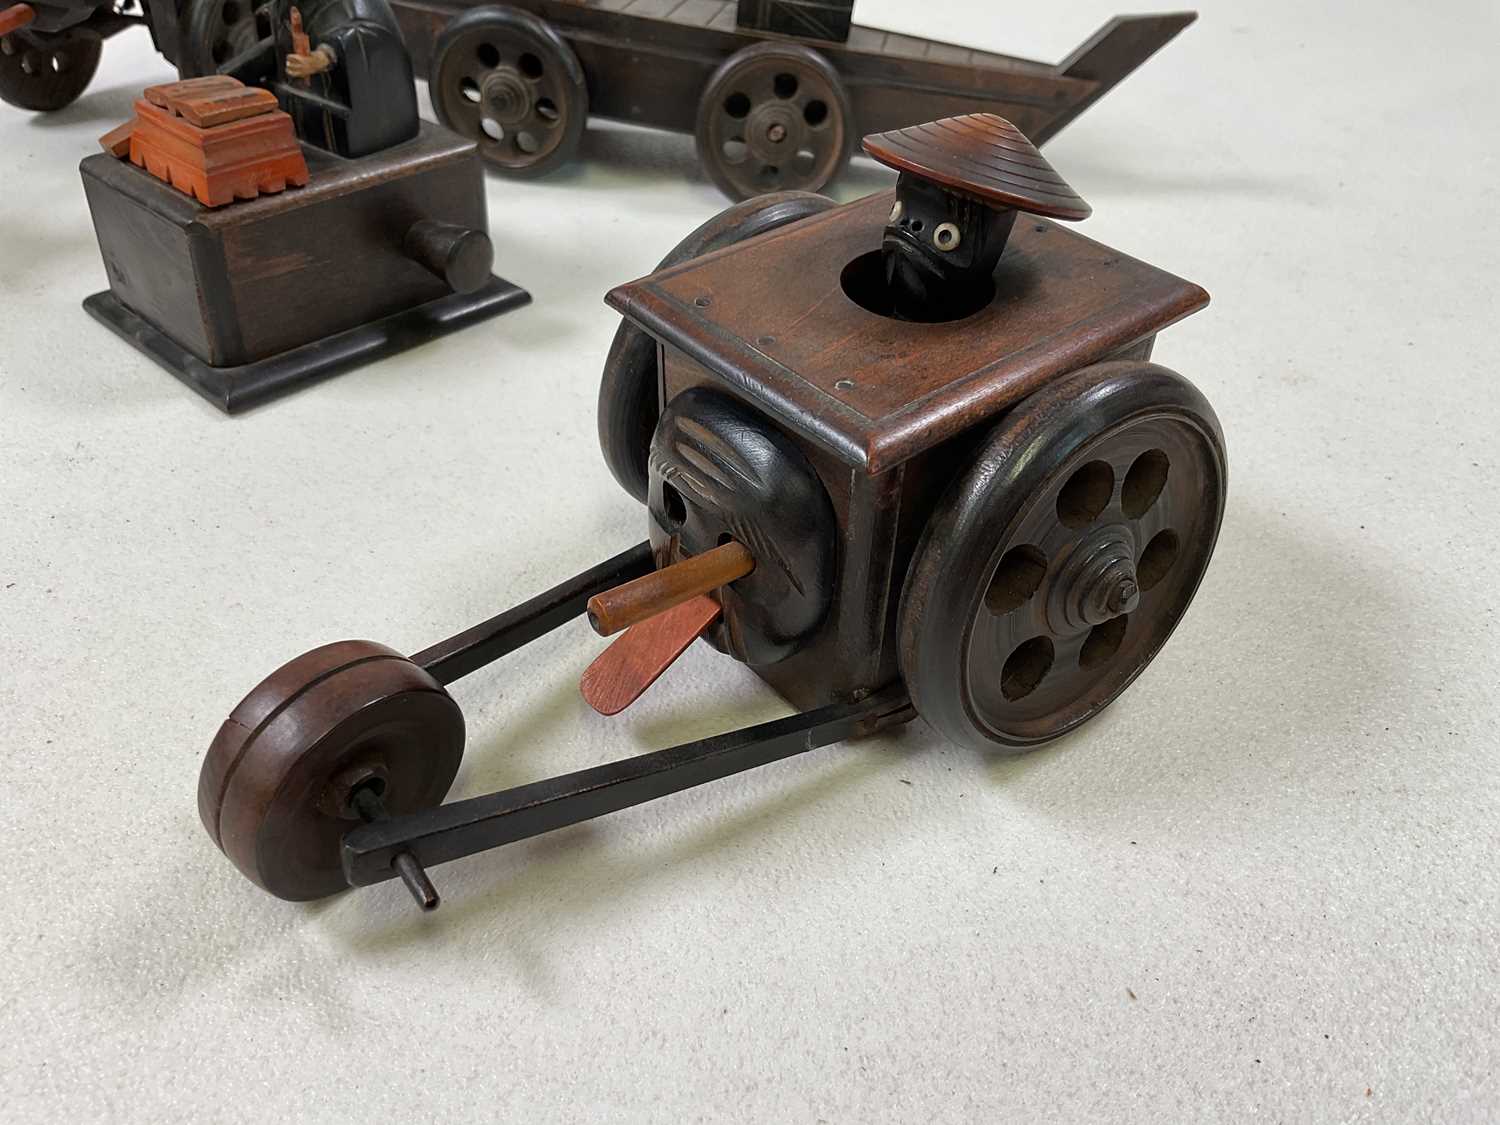 KOBE; six Japanese early 20th century novelty wooden toys, (in af condition). - Image 3 of 7